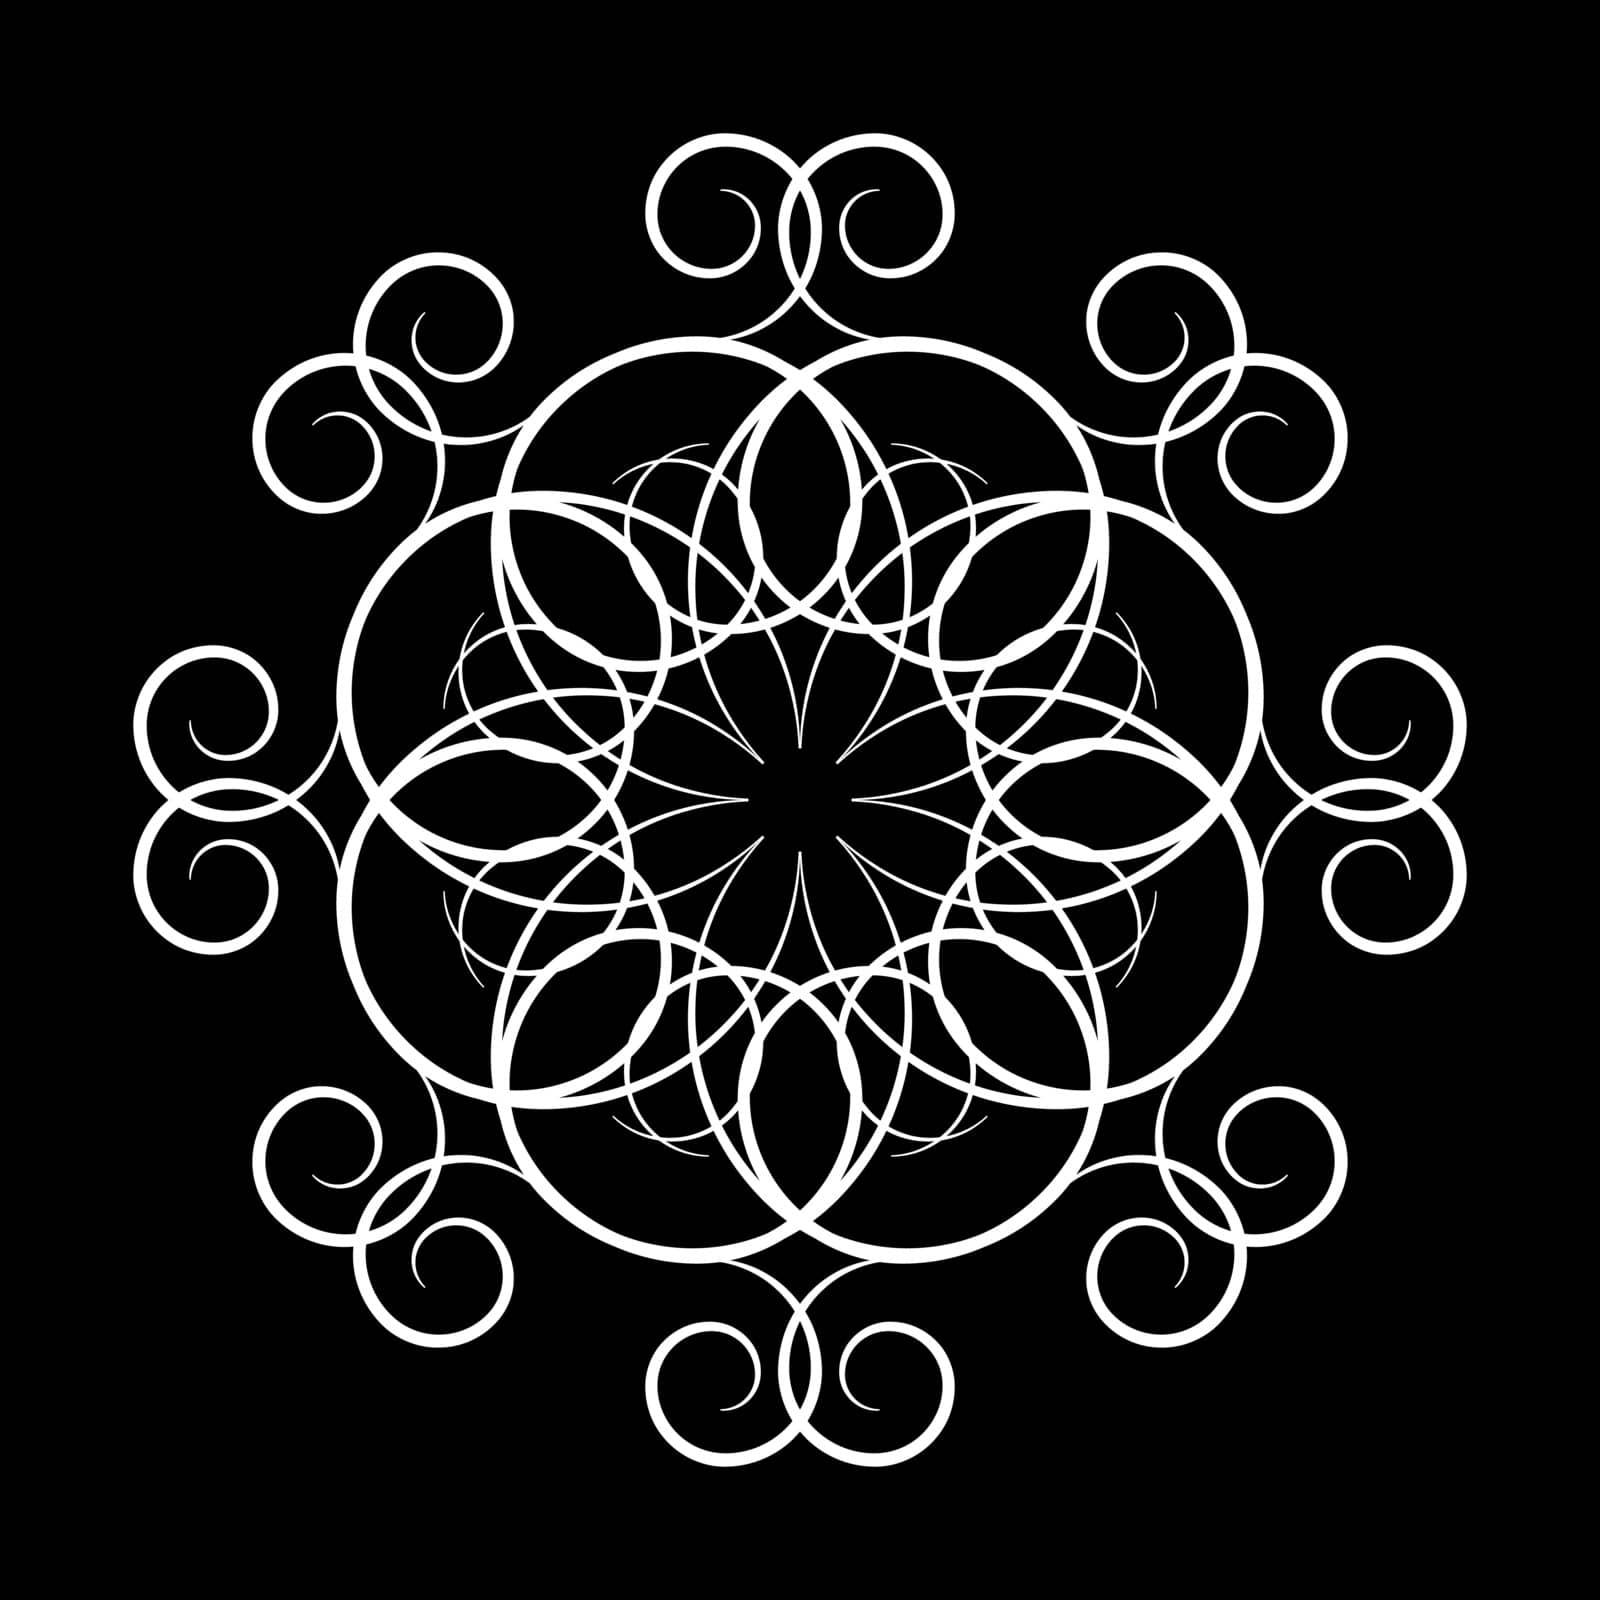 A circular ornament  of swirling lines, vector illustration.